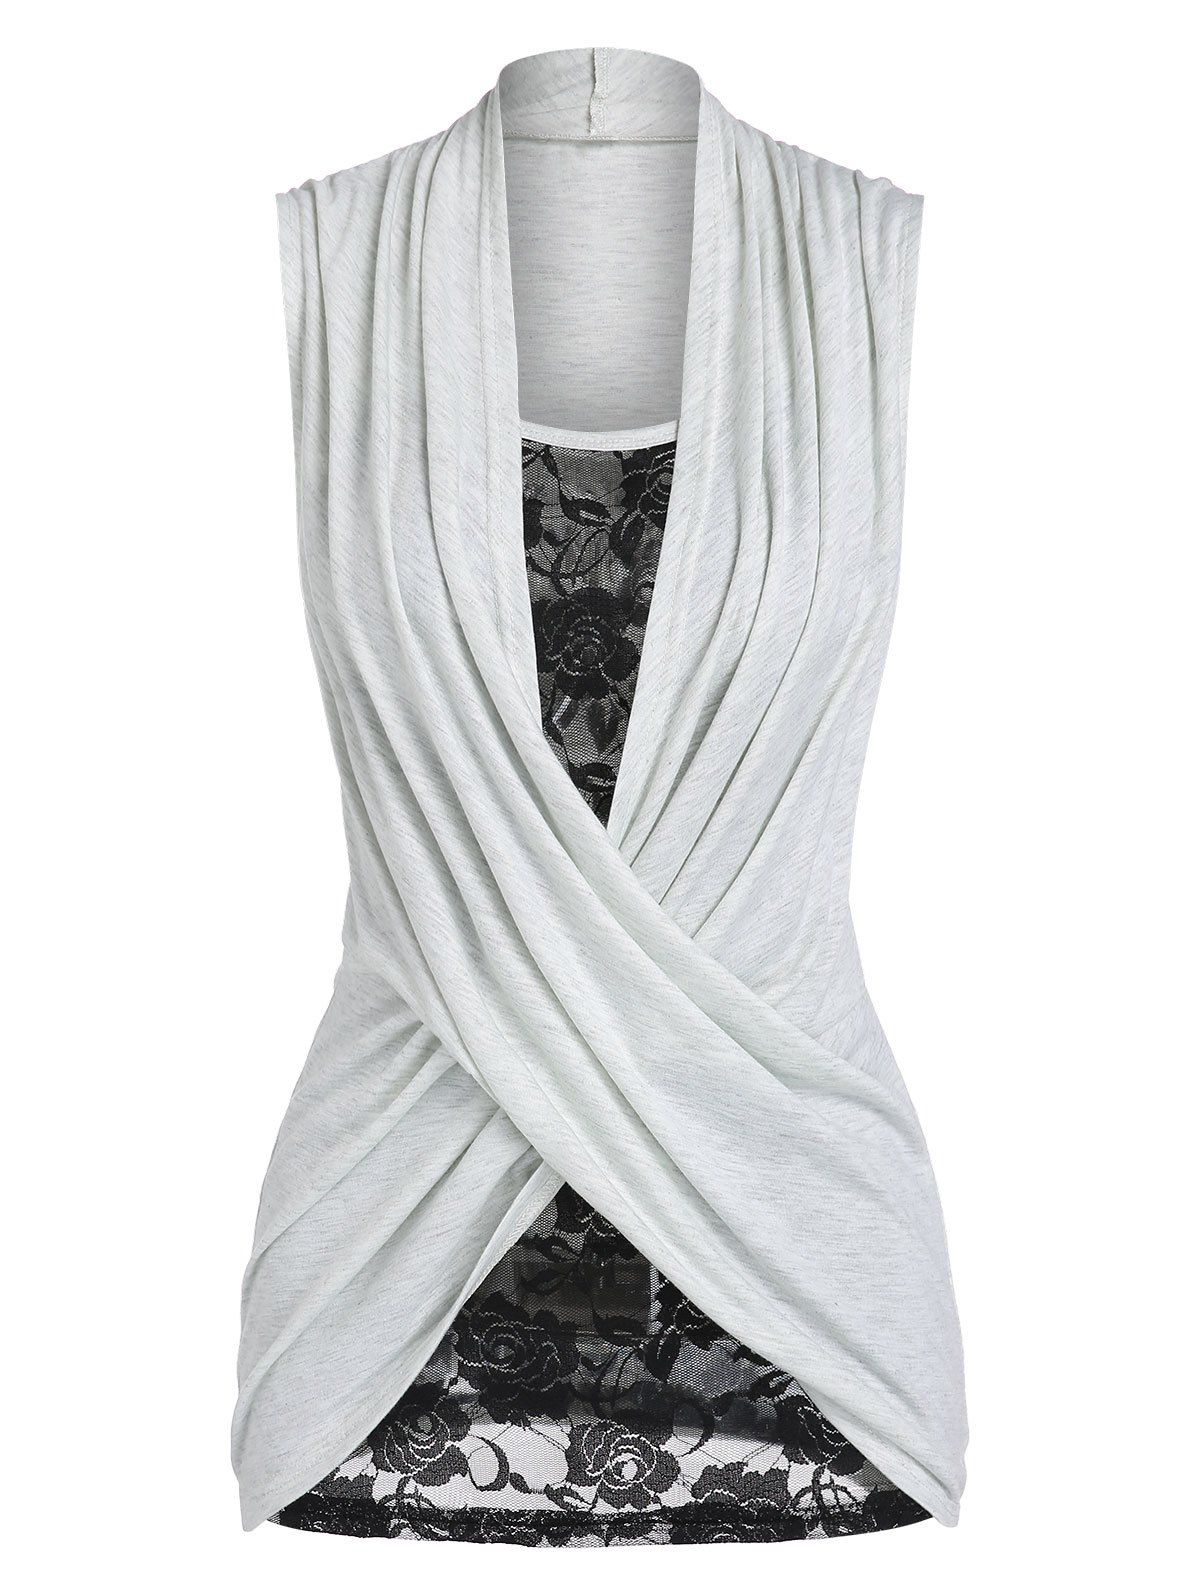 Allover Floral Lace Insert Cami Top and Heather Cross Ruched Tank Top - LIGHT GRAY XXL